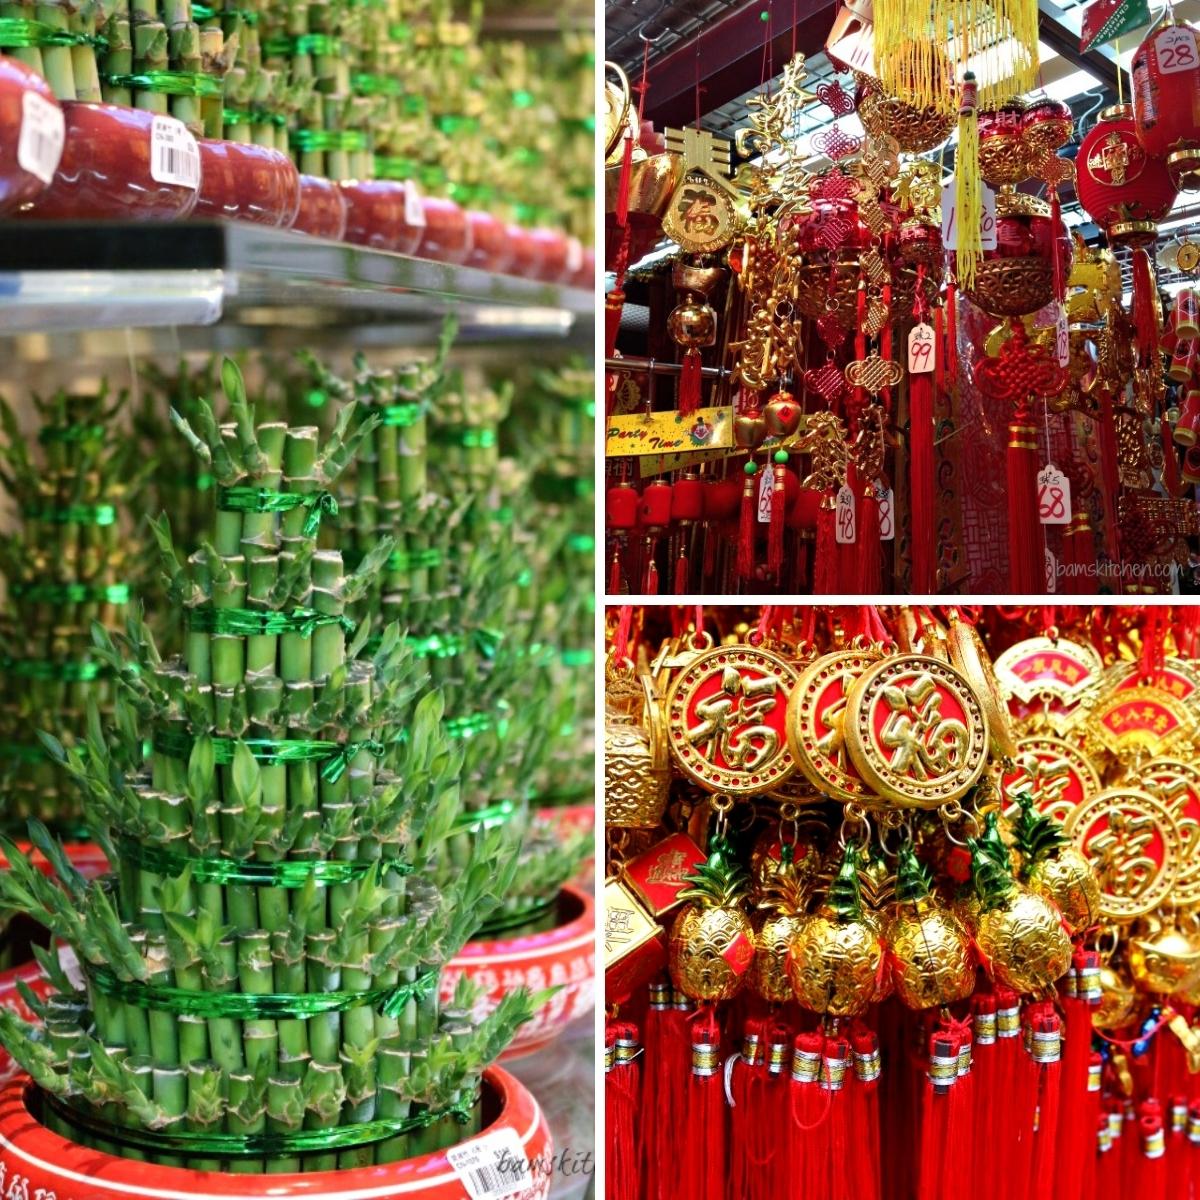 Chinese New Year Recipe flowers and items commonly used to decorate the dining table.